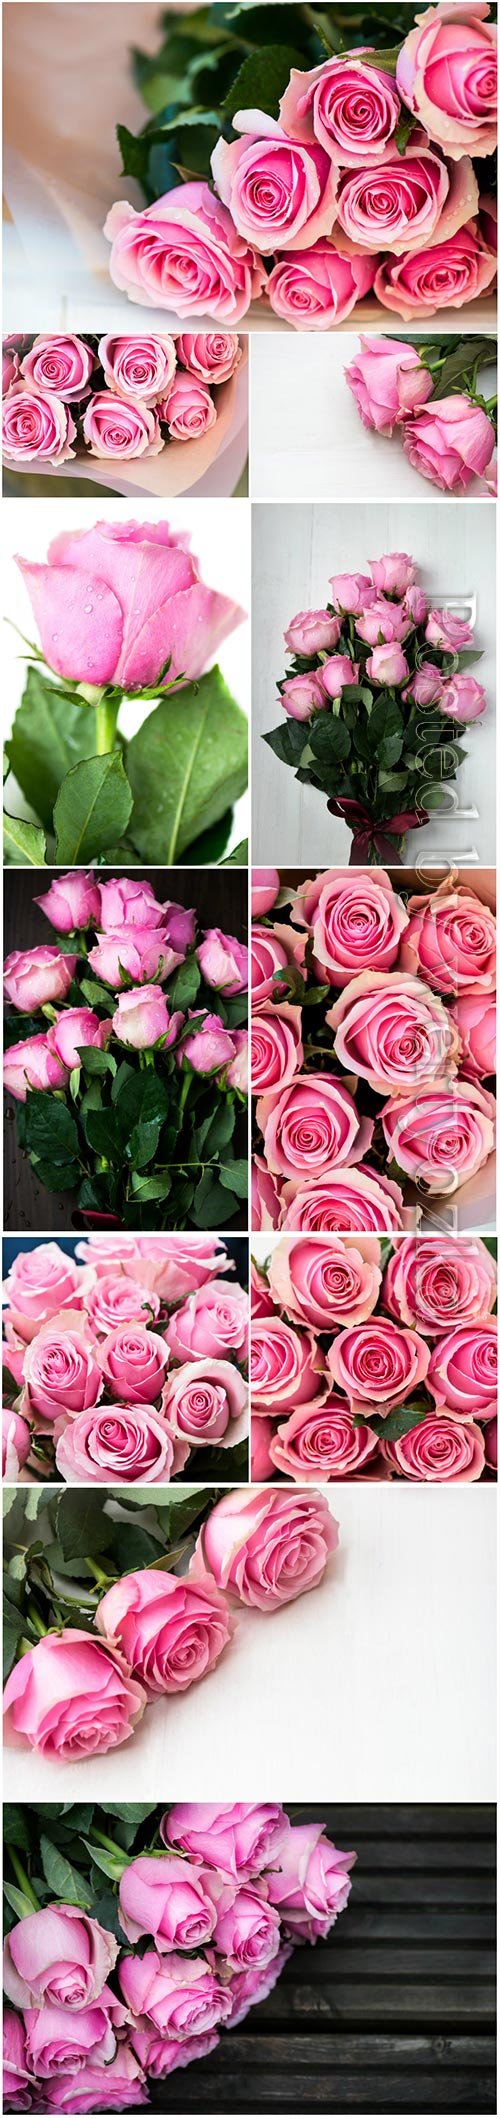 Bouquets of pink roses beautiful stock photo